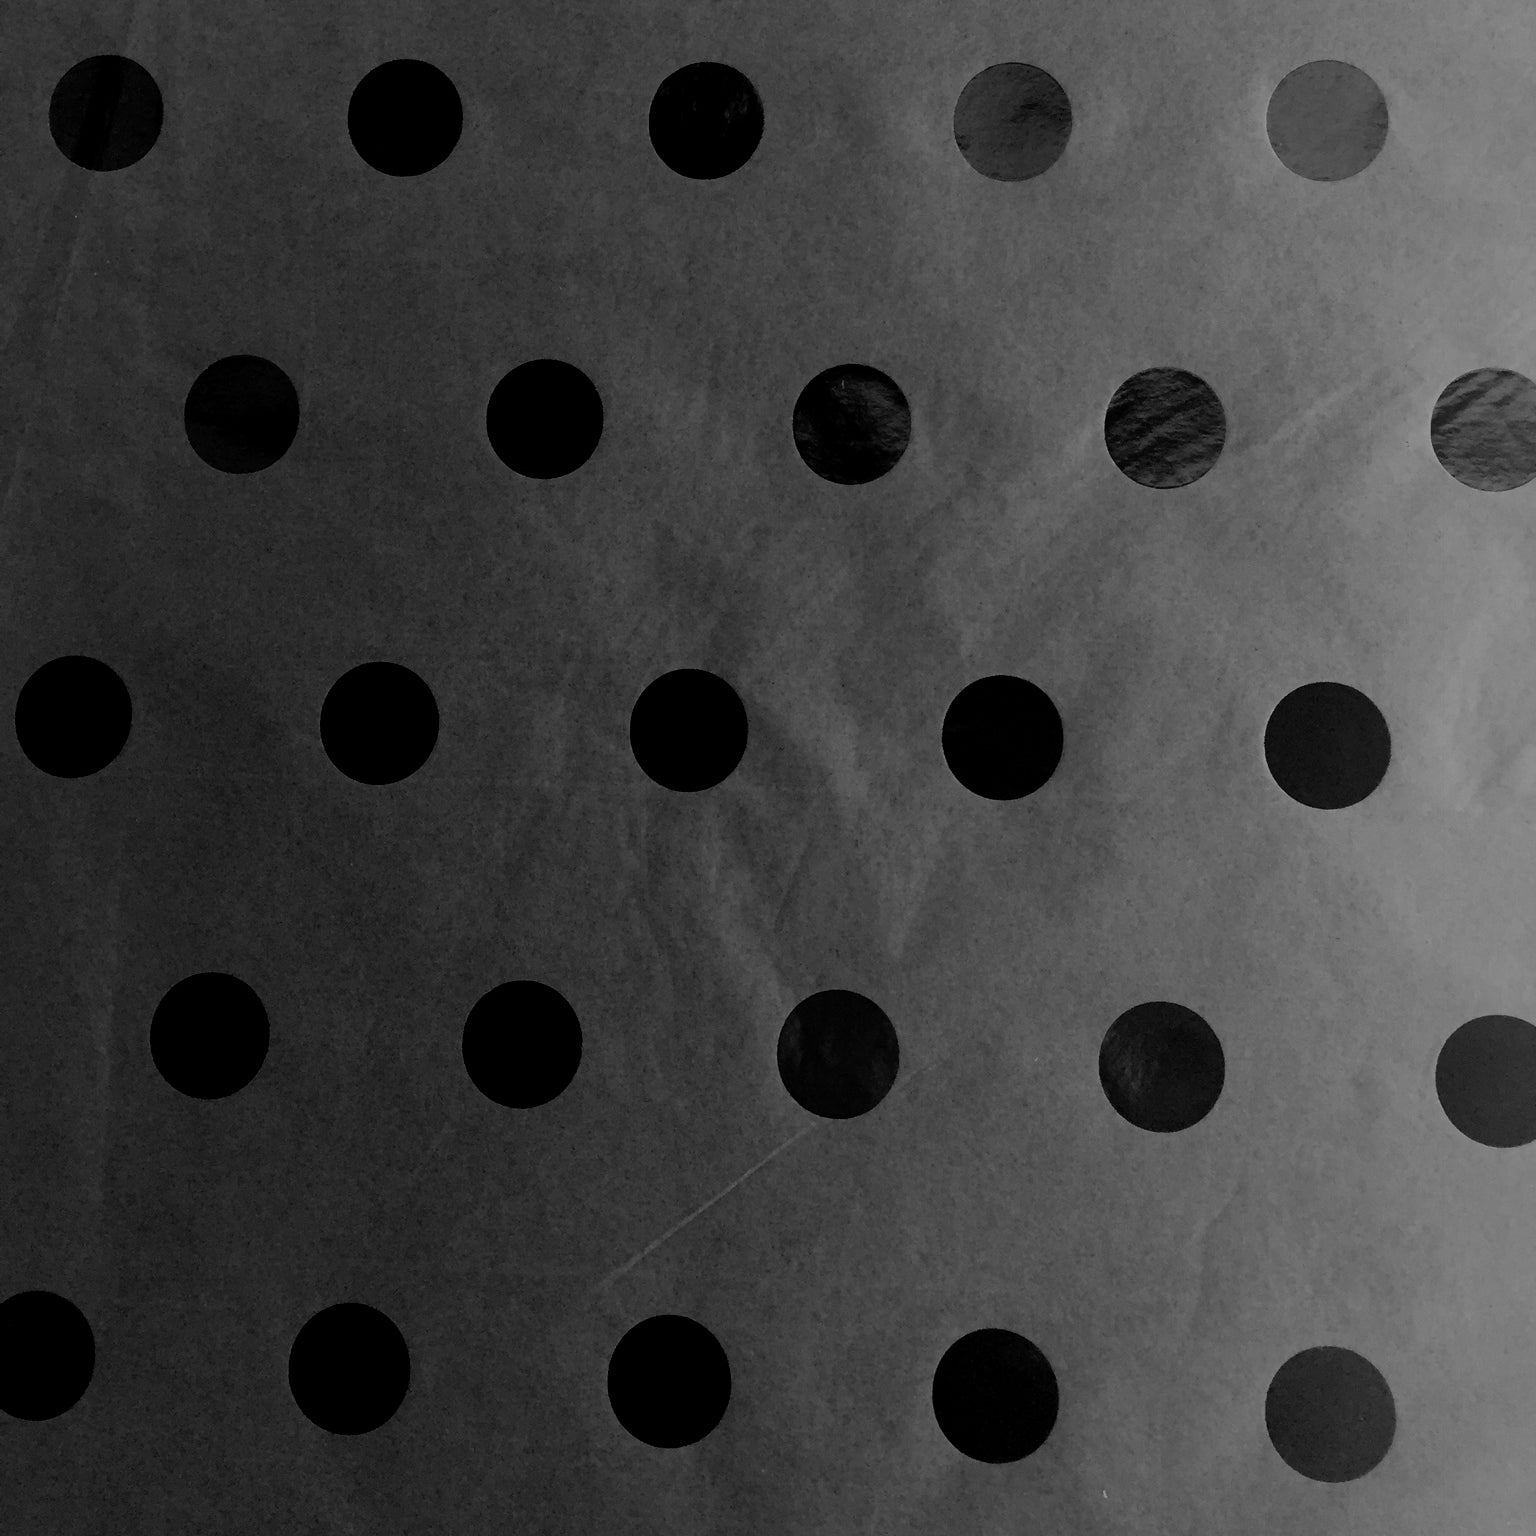 BHD21a Black Hot Dots Foil Tissue Paper Swatch